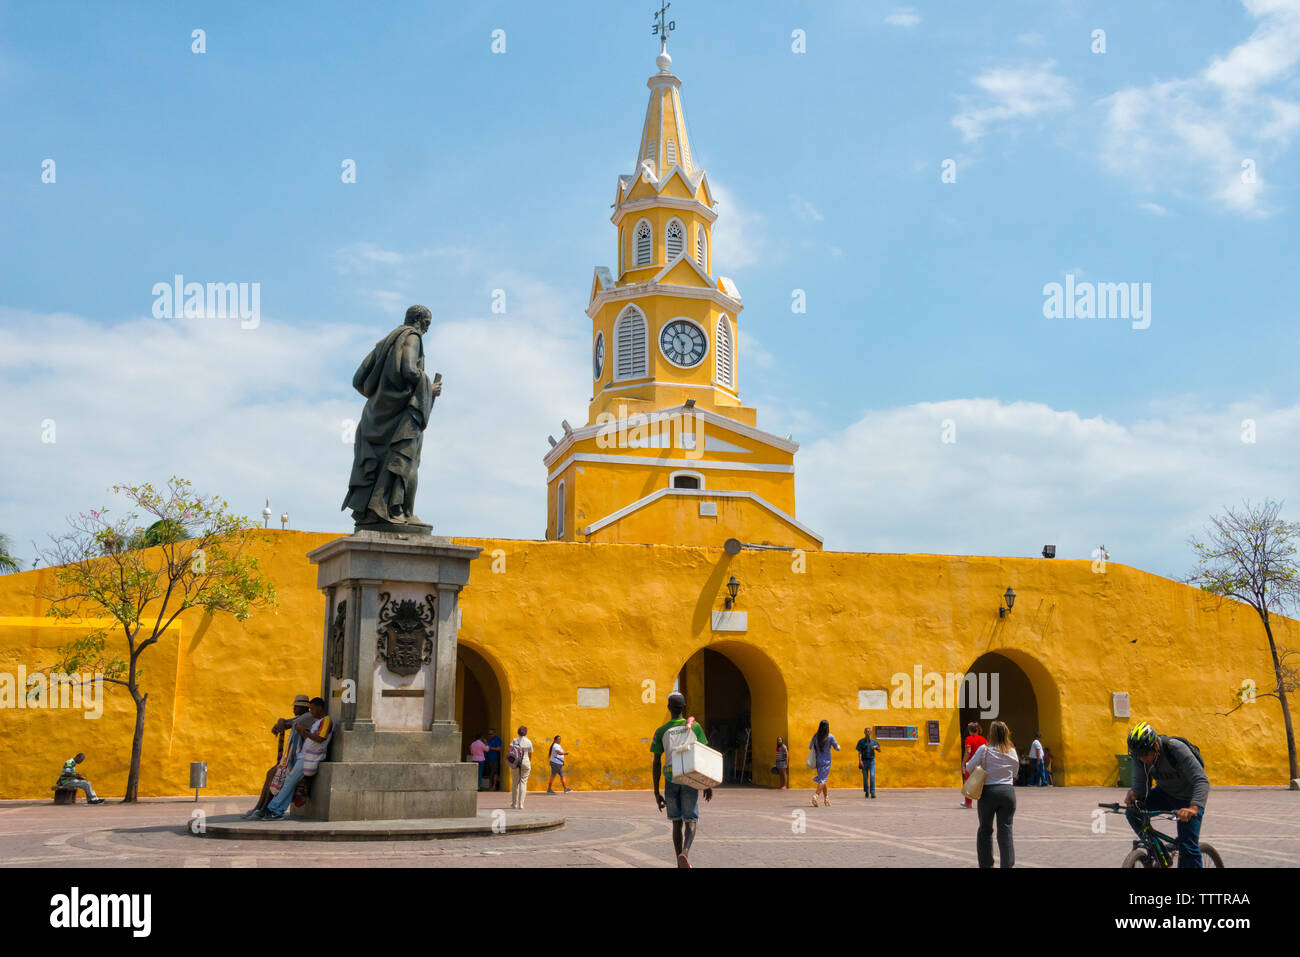 Statue of Pedro de Heredia and public clock tower at Boca del Puente, the main entrance to the historic center of Cartagena, UNESCO World Heritage sit Stock Photo